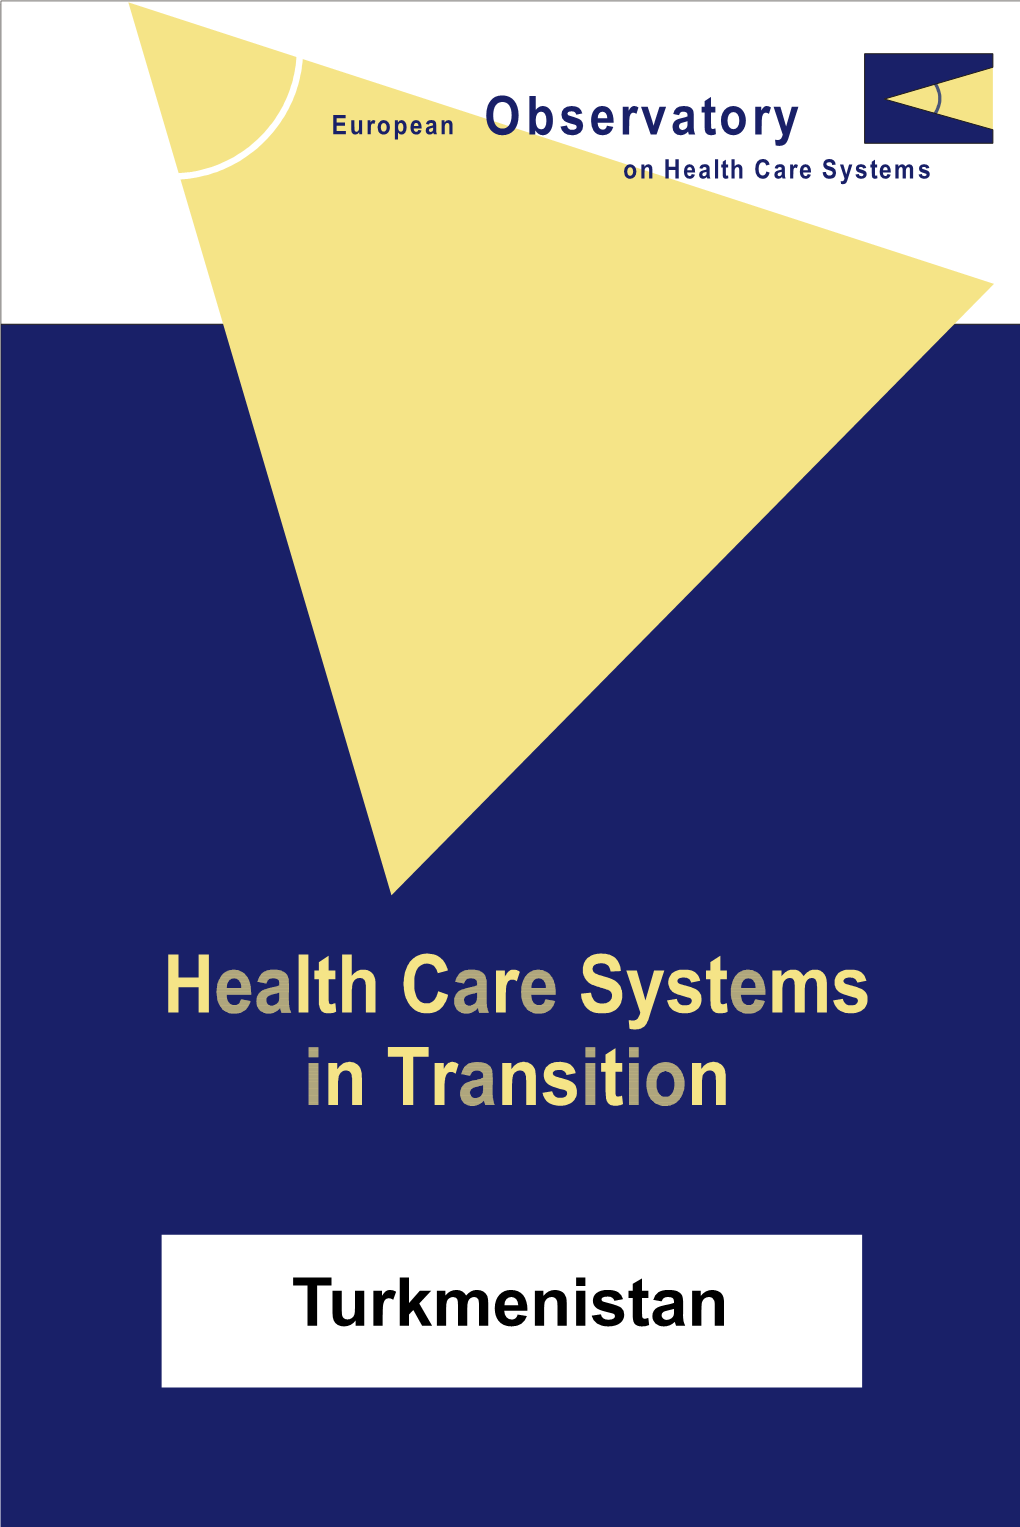 Turkmenistan Health Care Systems in Transition I IONAL B at an RN K E F T O N R I WORLD BANK